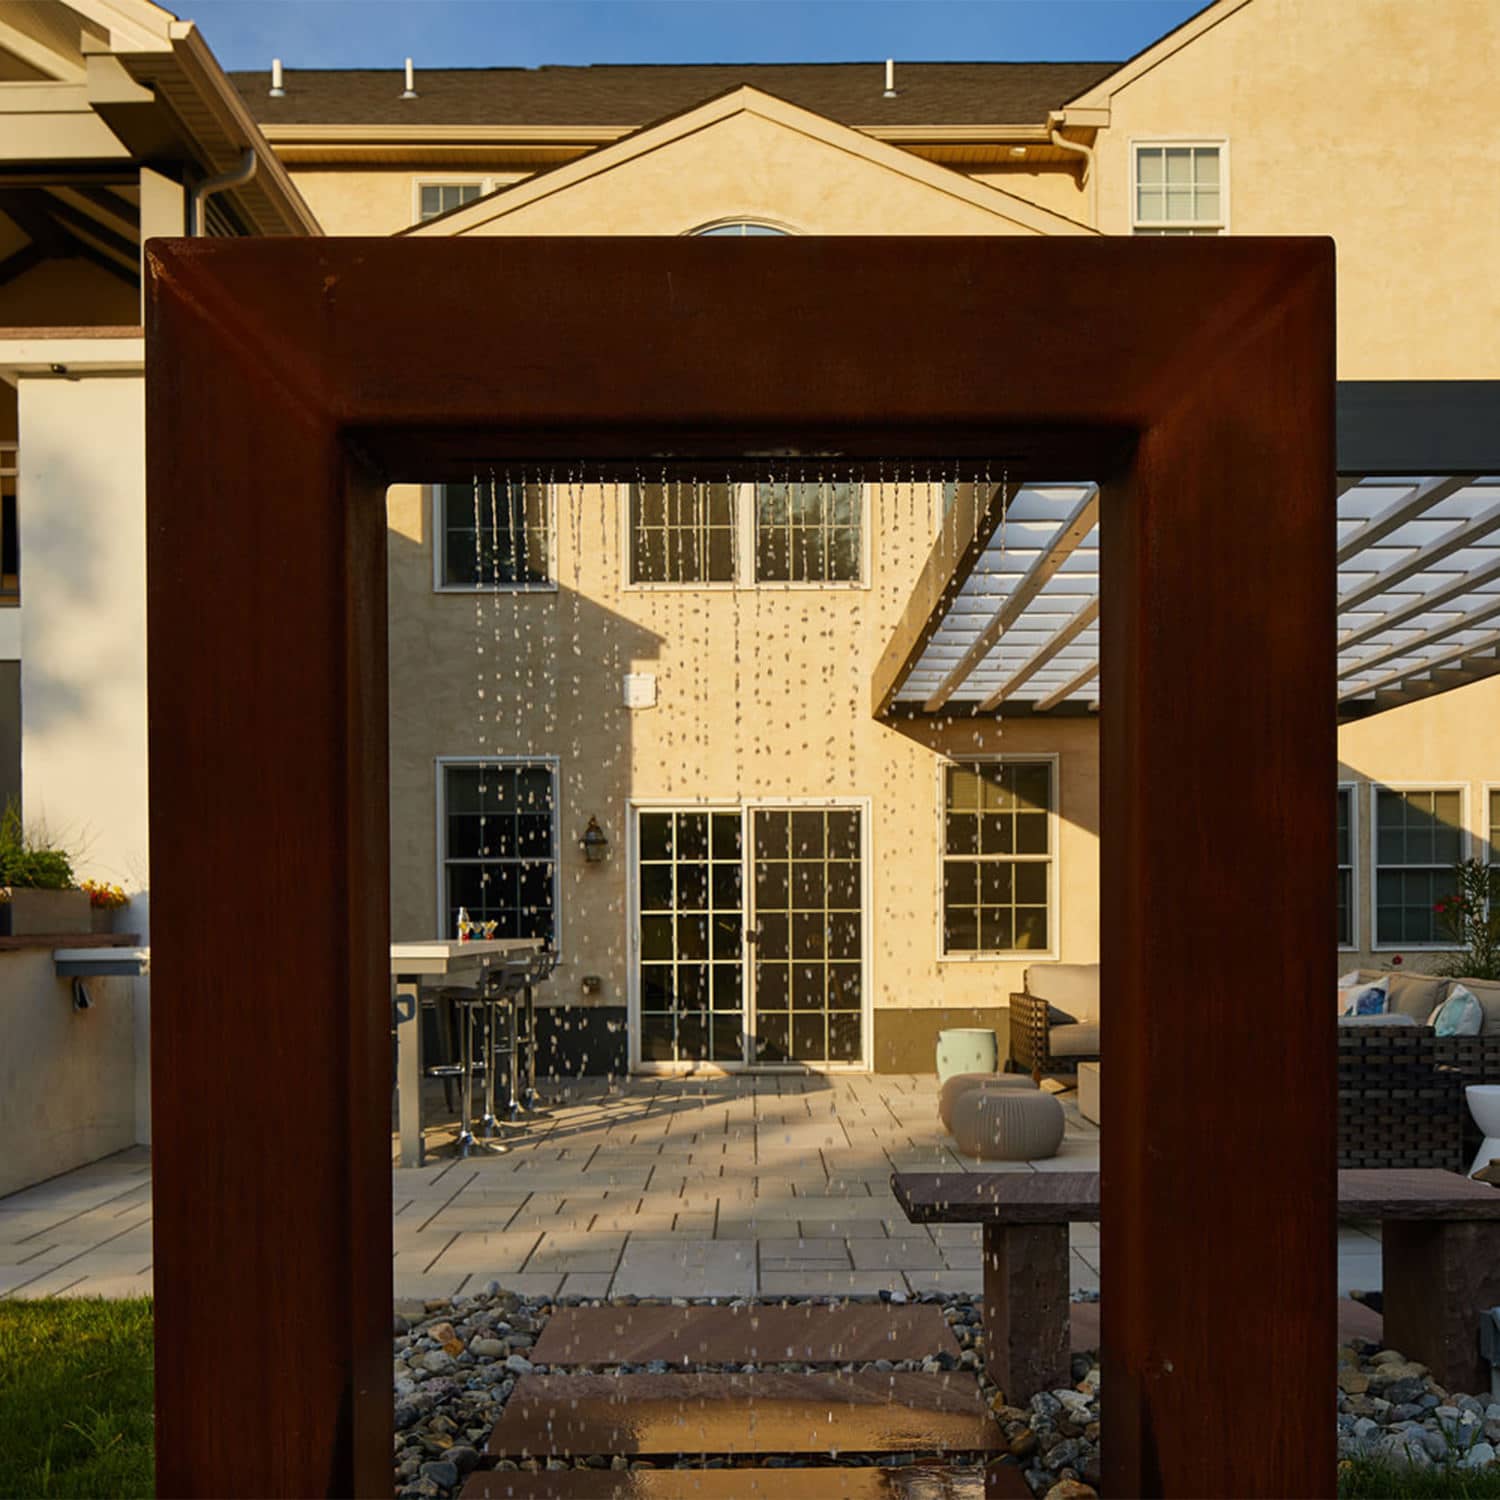 Perfect placement is everything, especially when it comes to focal points when viewed from inside the home!